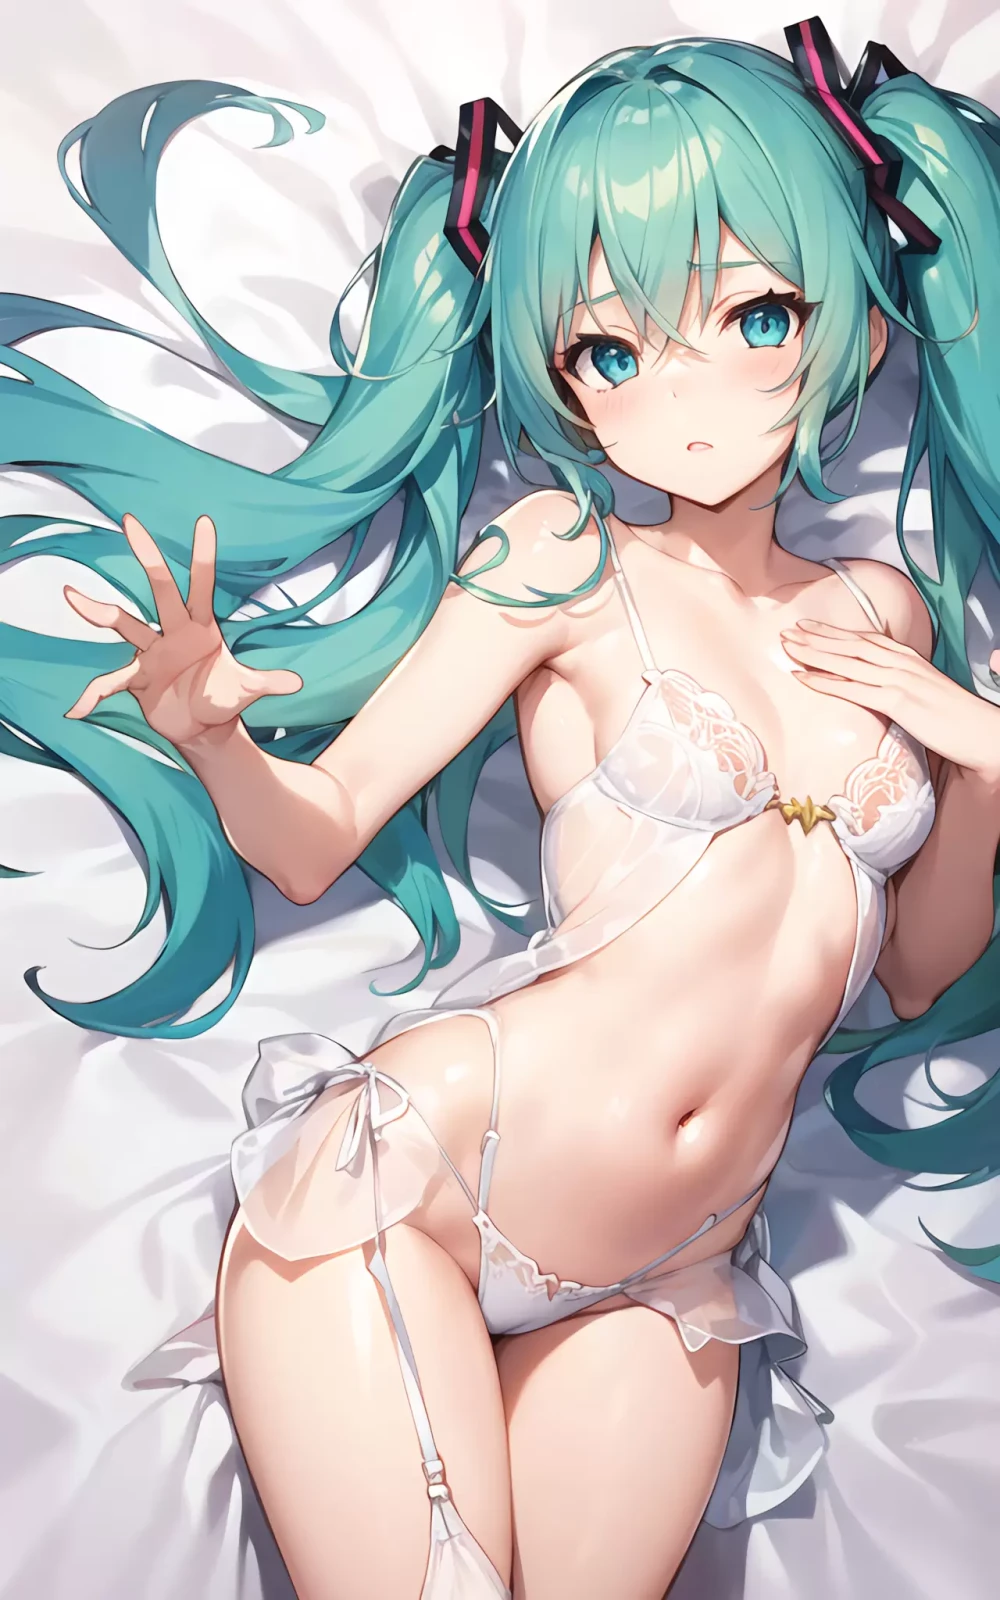 hatsune-miku-anime-style-all-ages-2